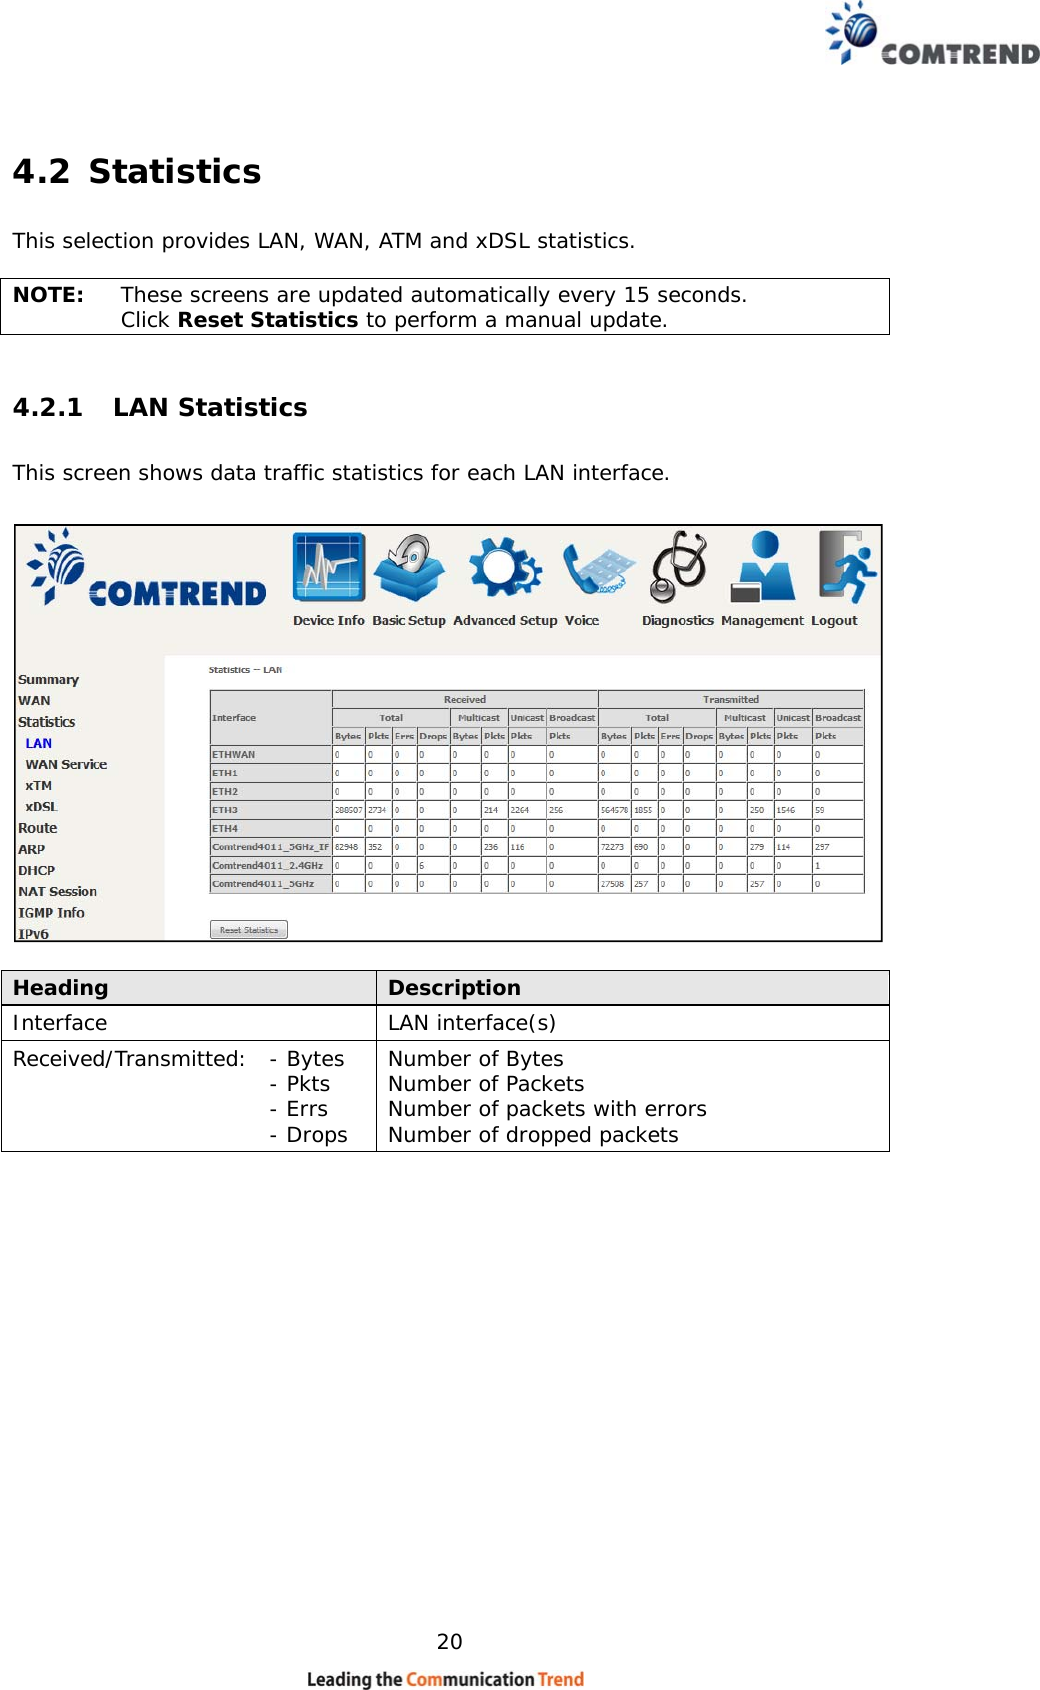    20 4.2 Statistics This selection provides LAN, WAN, ATM and xDSL statistics.  NOTE:  These screens are updated automatically every 15 seconds.  Click Reset Statistics to perform a manual update. 4.2.1 LAN Statistics This screen shows data traffic statistics for each LAN interface.    Heading  Description Interface  LAN interface(s) Received/Transmitted: - Bytes  - Pkts  - Errs  - Drops Number of Bytes  Number of Packets  Number of packets with errors Number of dropped packets     